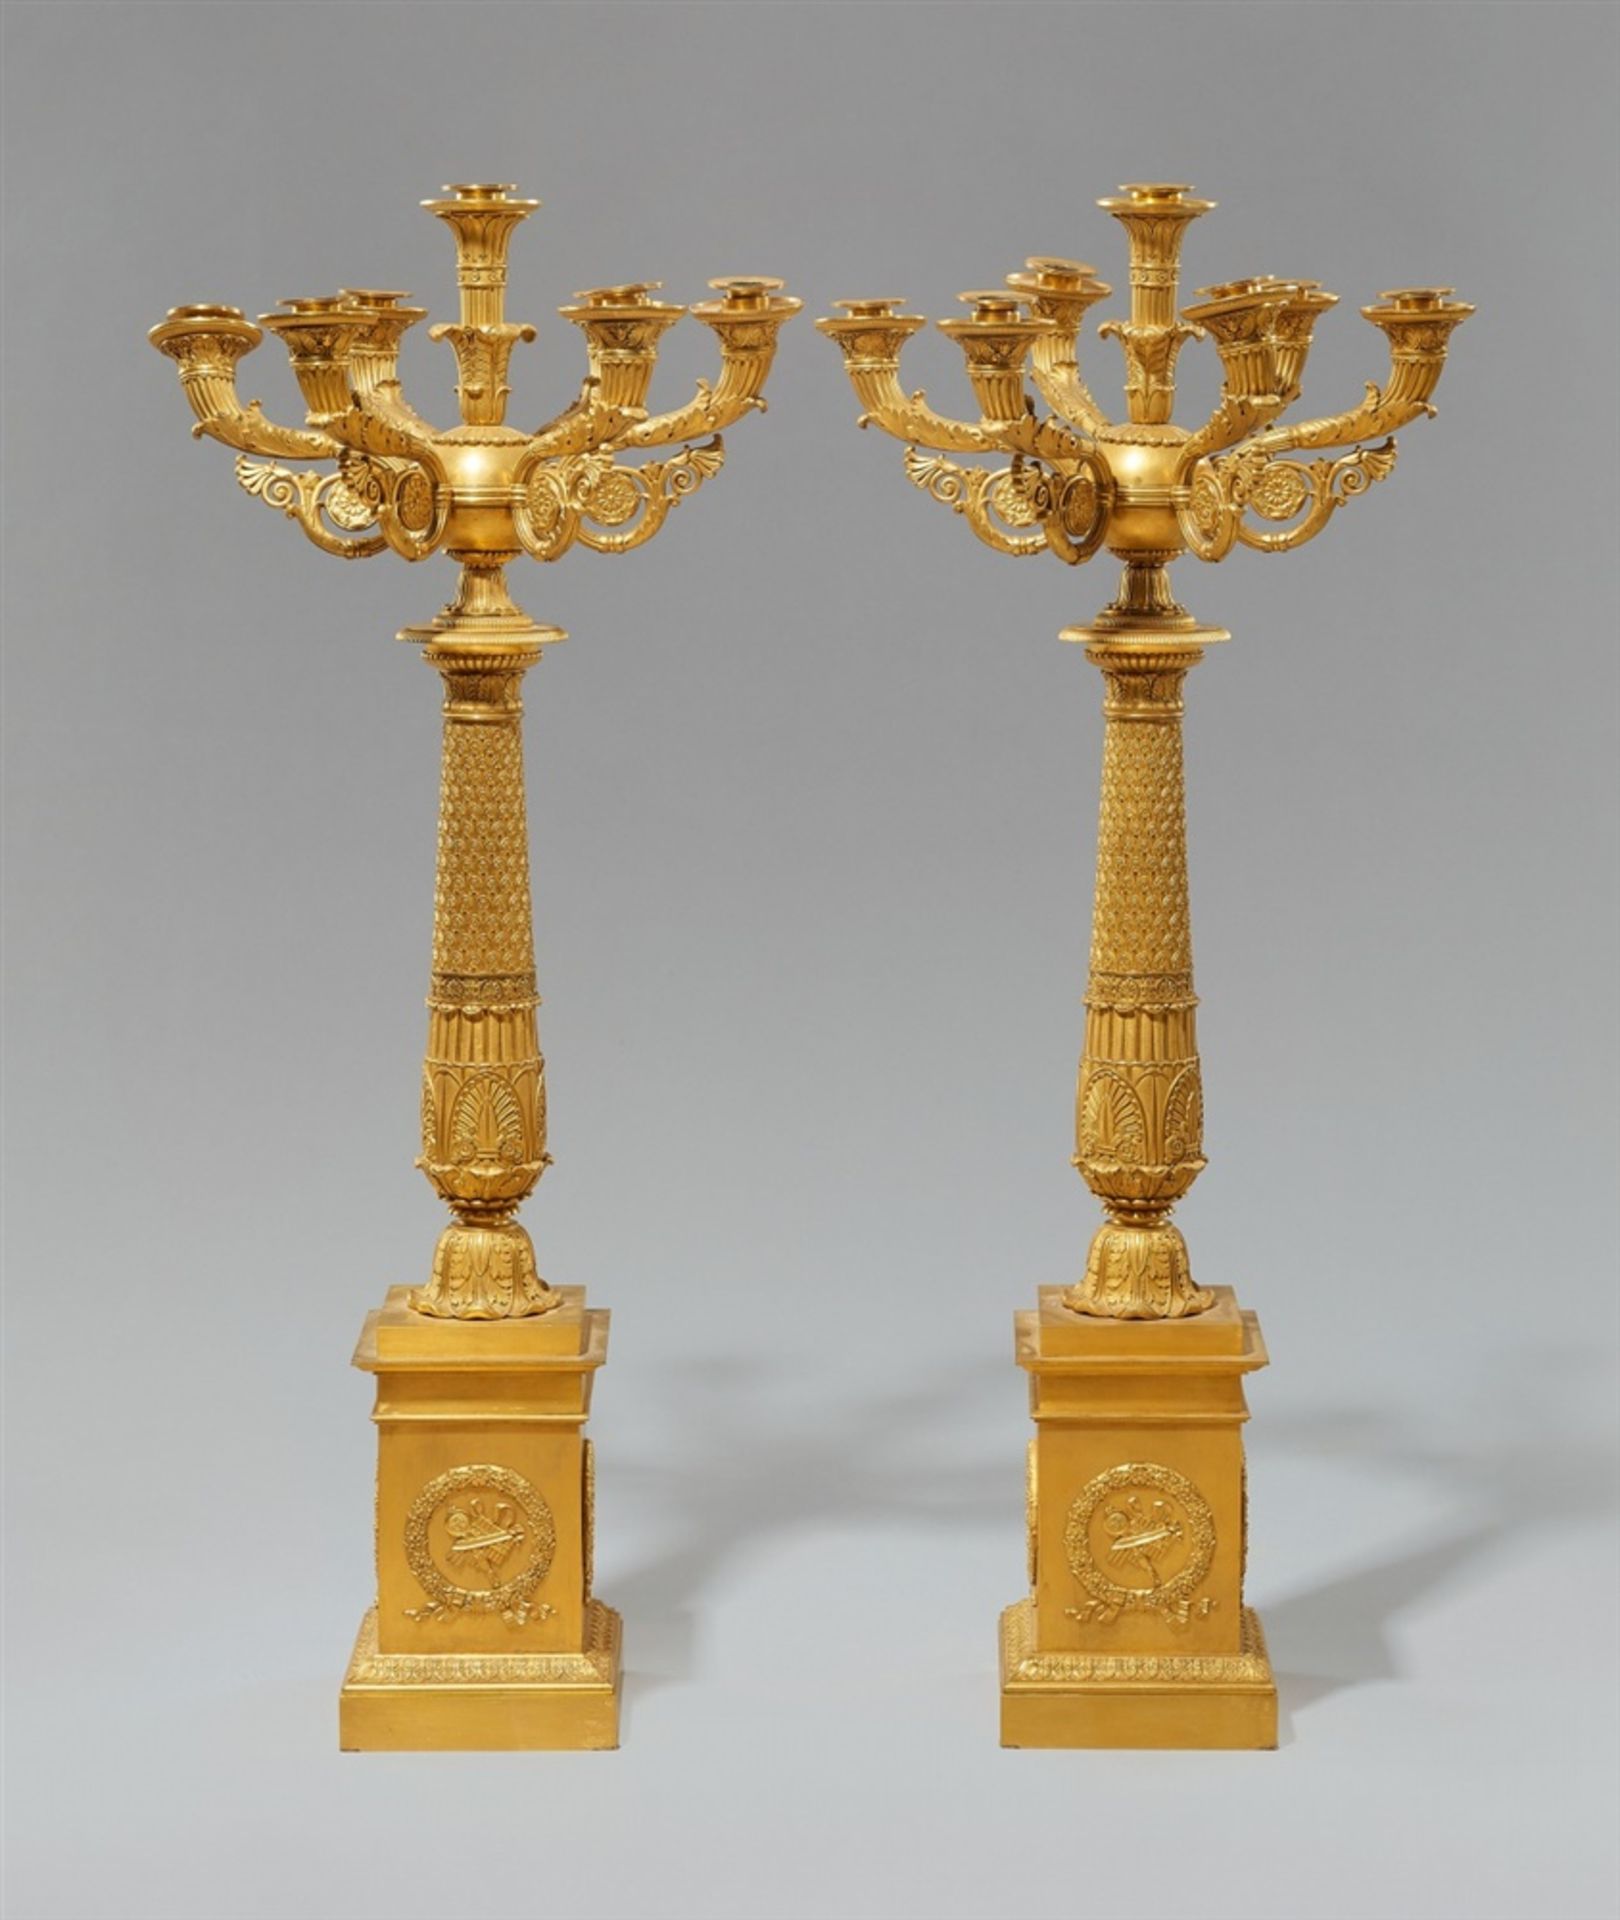 A pair of Empire table candelabra from the Château de NeuillyOrmolu candelabra made from several